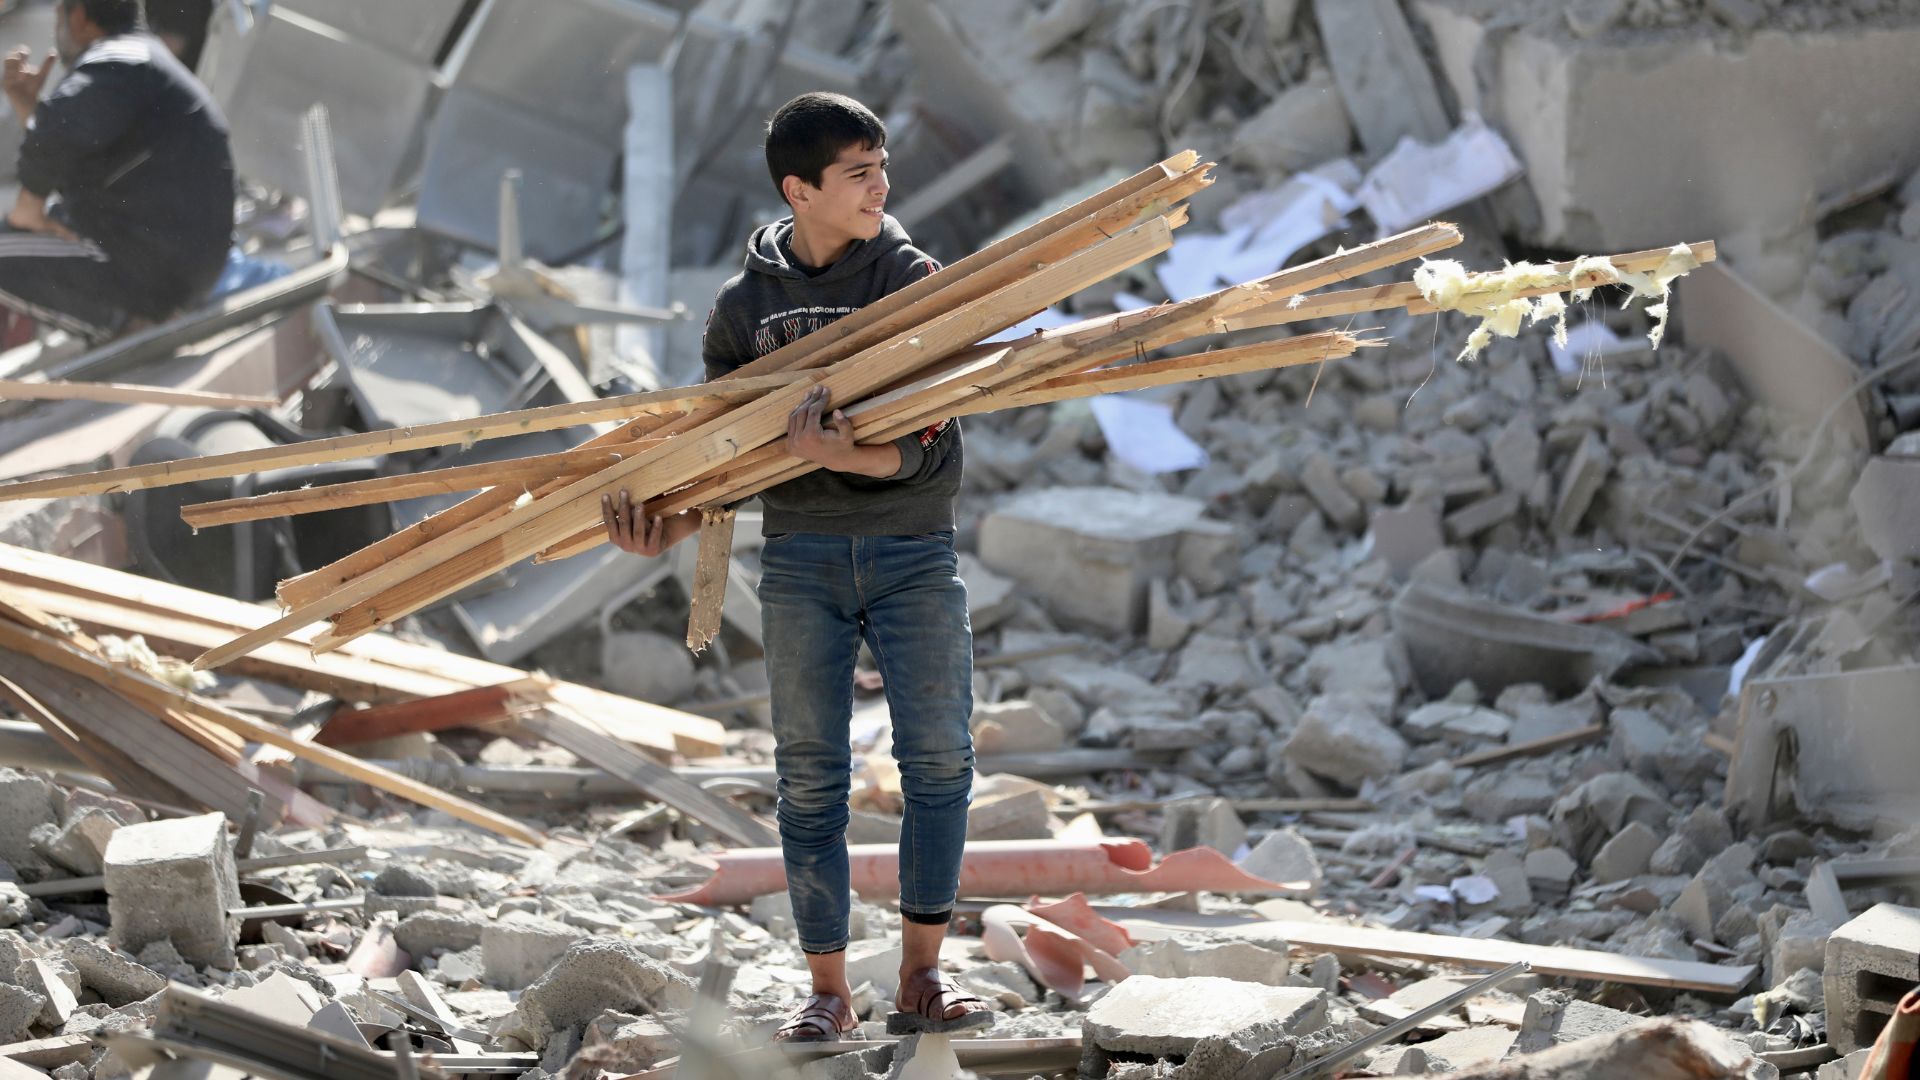 Will it be safe for Palestinians in Gaza to return and rebuild their homes? | Israel War on Gaza